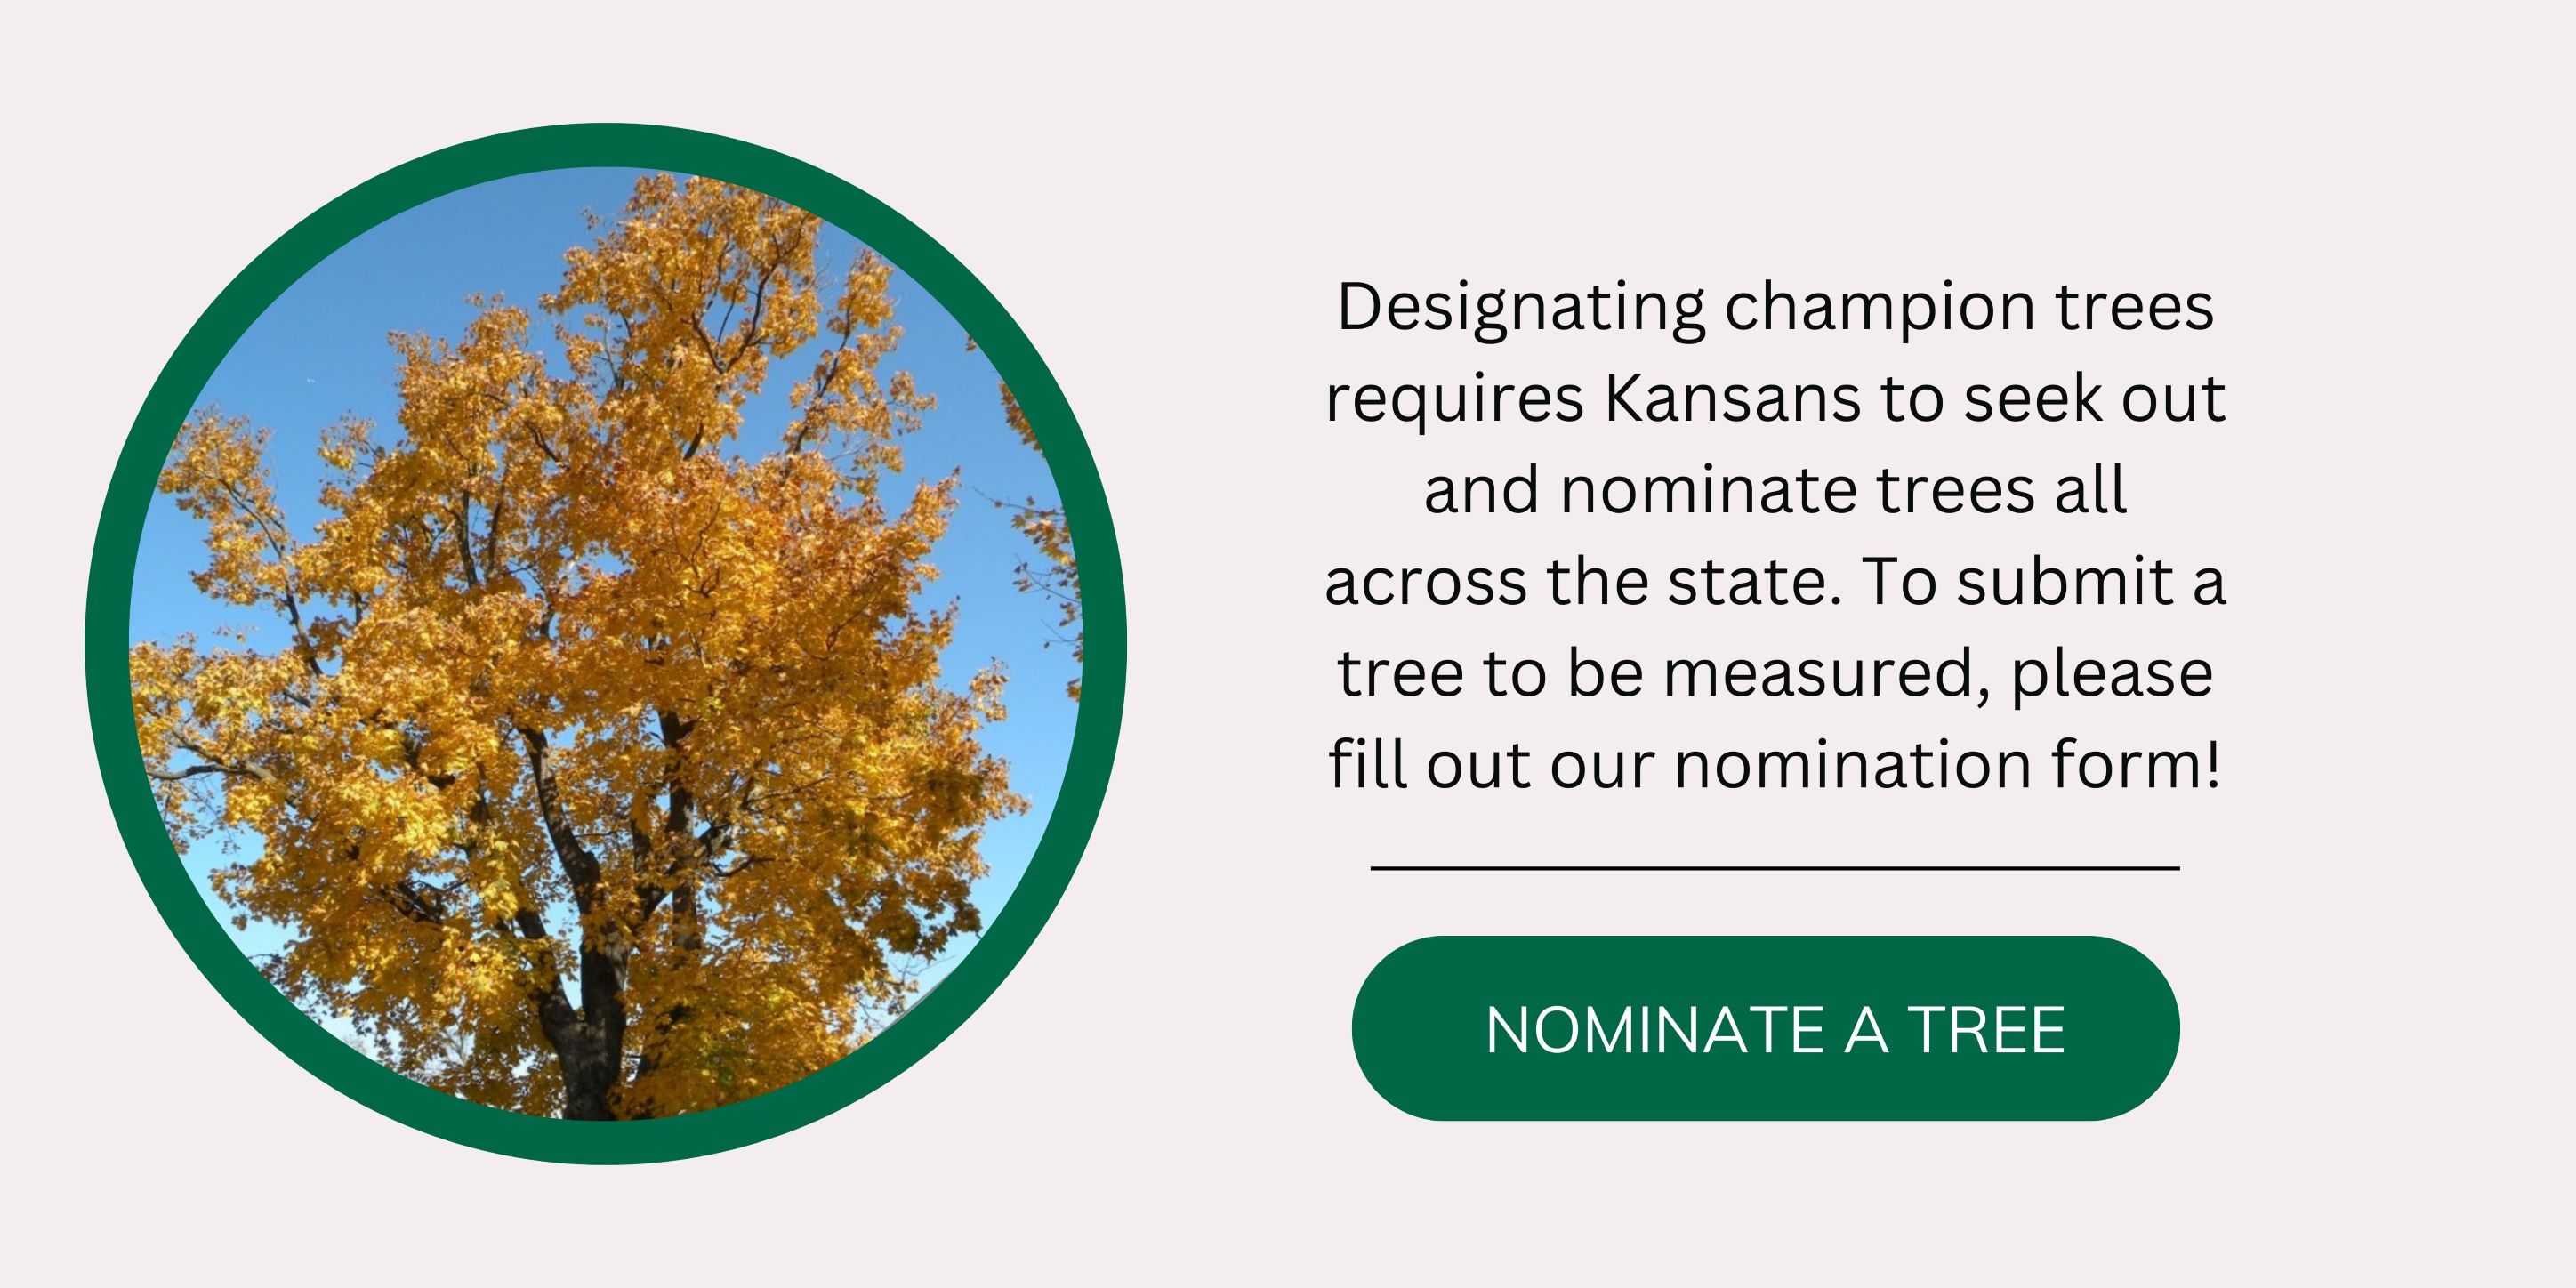 Nominate a tree